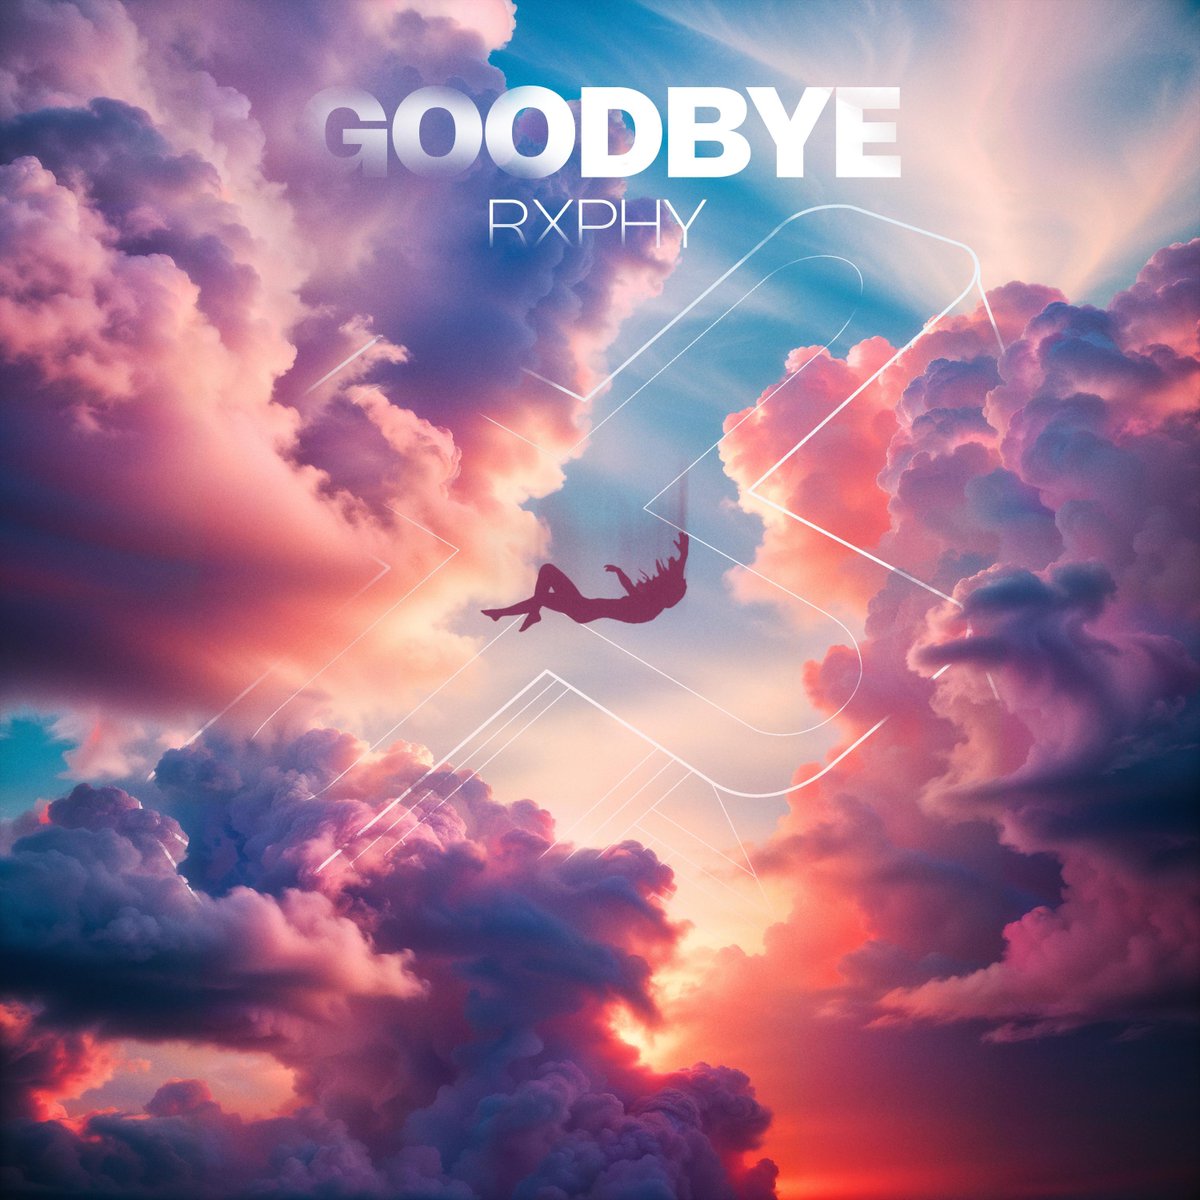 GOODBYE IS OUT NOW COME STREAM ON ALL PLATS FIRST SONG OF THE YEAR AND MORE TO COME